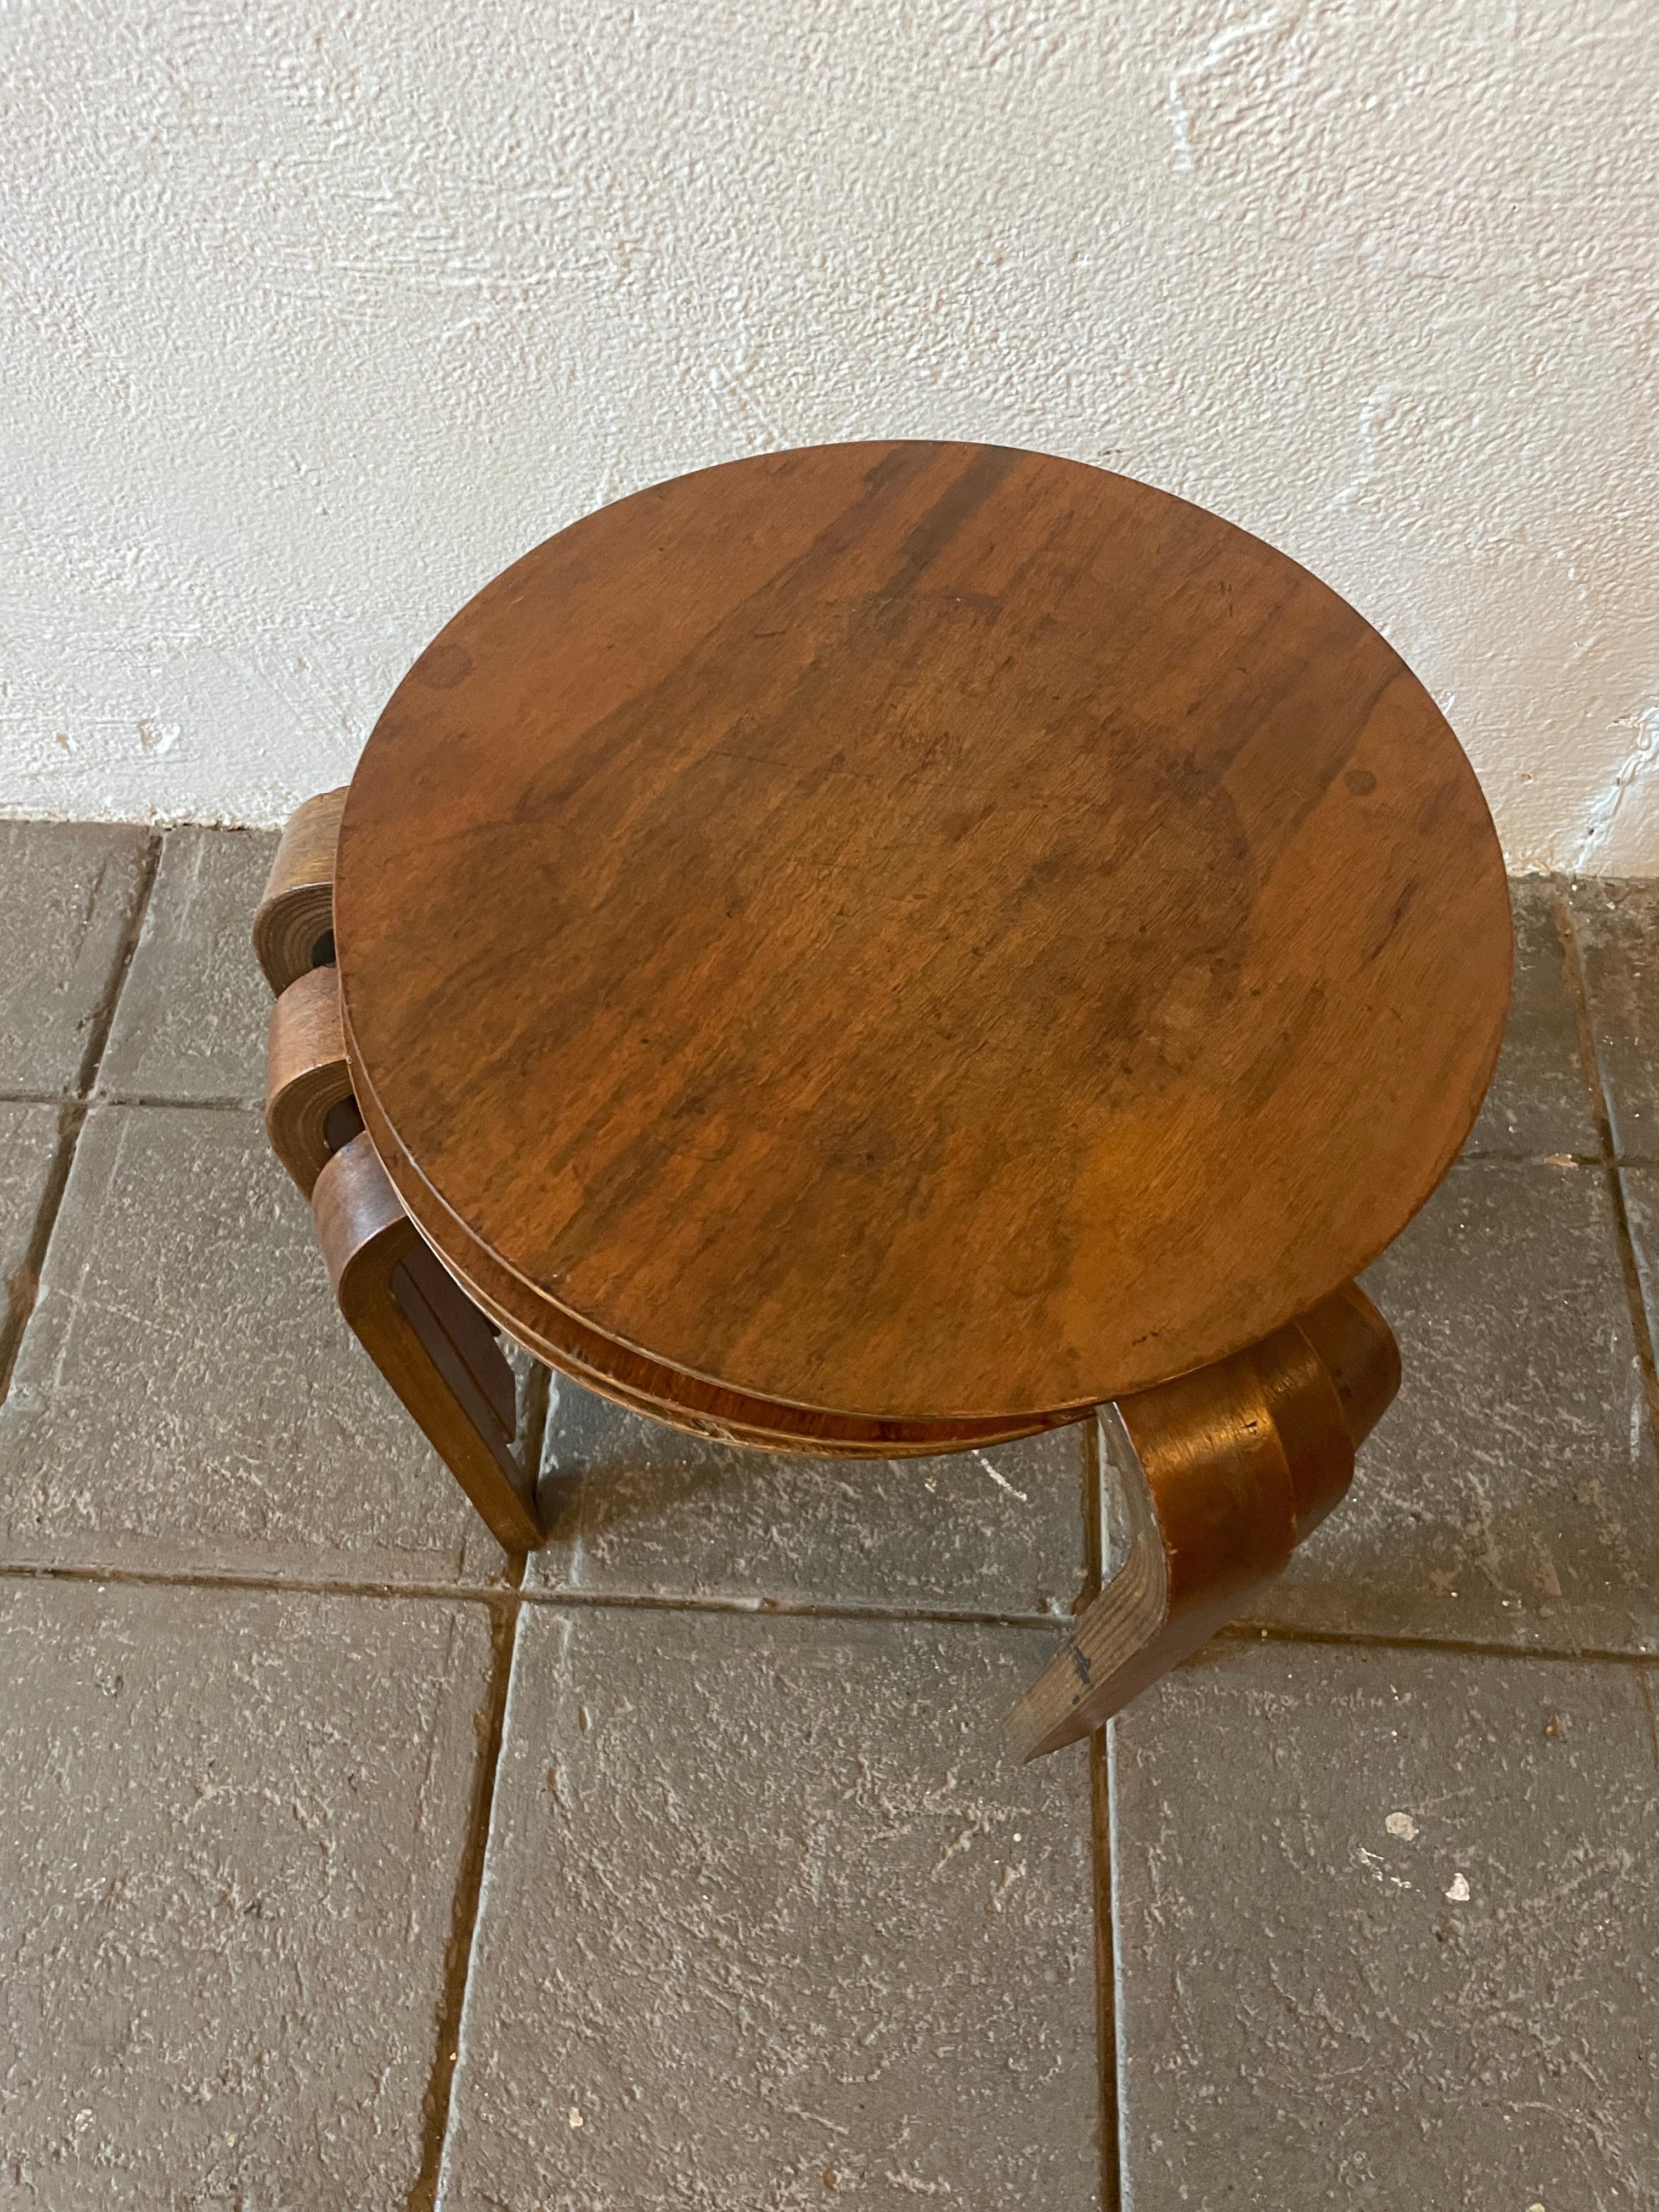 Set of 3 Danish Scandinavian nesting tables or stools. Beautiful bent plywood legs and circular tops showing very little to no use. Medium brown finish with patina. Flat head screws labeled made in Denmark. Set of 3 matching stools or end tables.